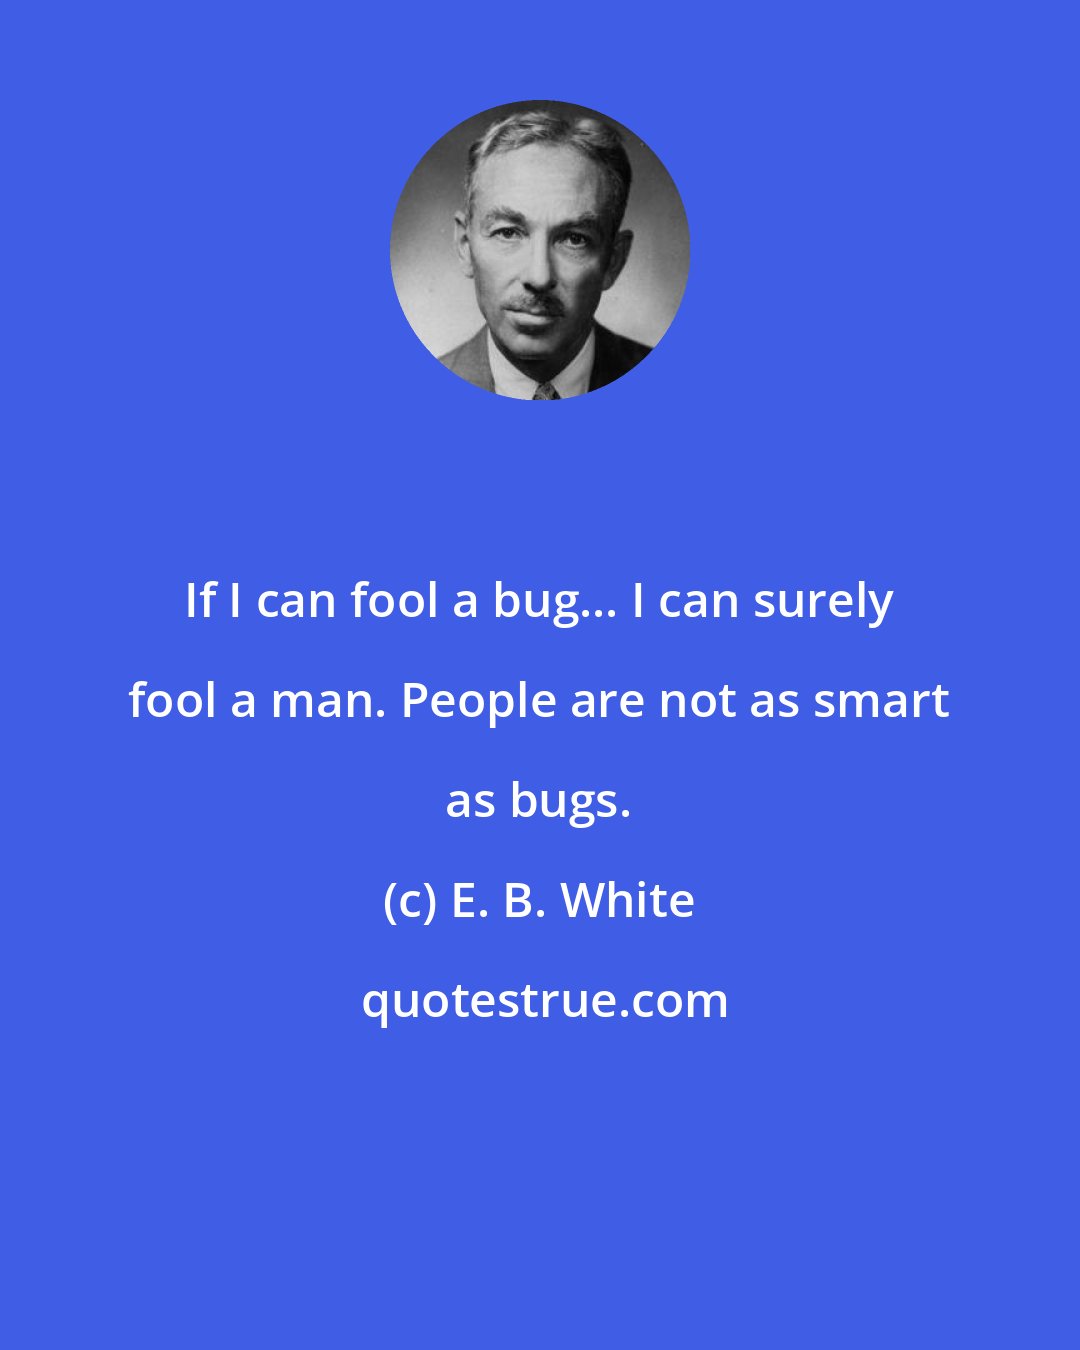 E. B. White: If I can fool a bug... I can surely fool a man. People are not as smart as bugs.